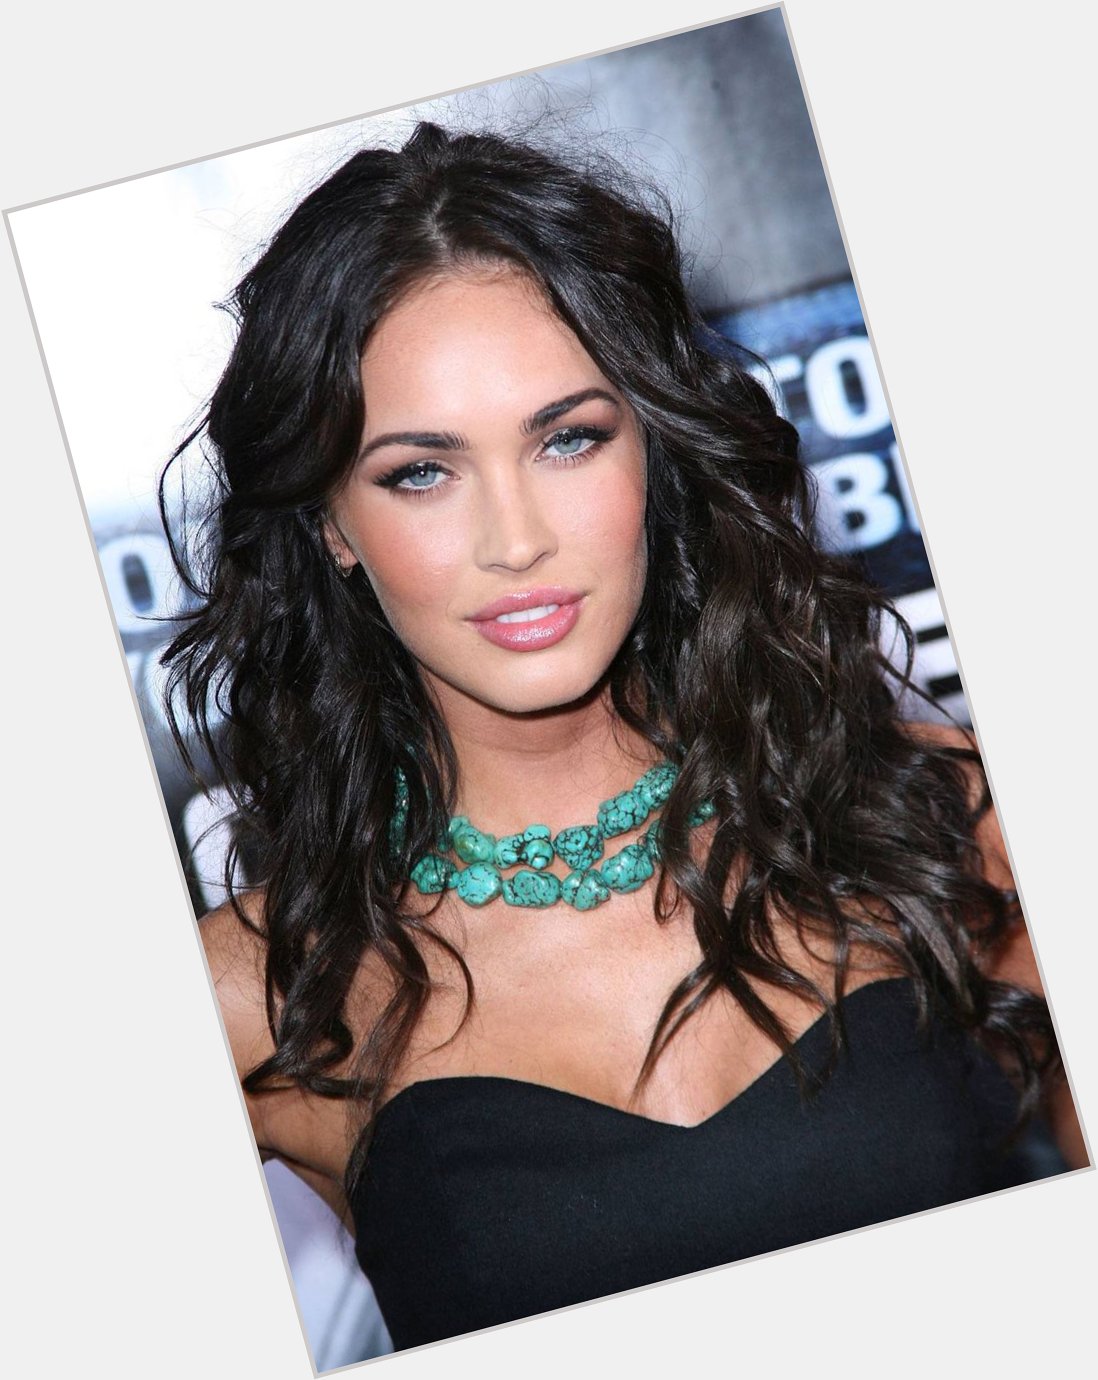 Good morning. Starting today with a Happy Birthday to MEGAN FOX 